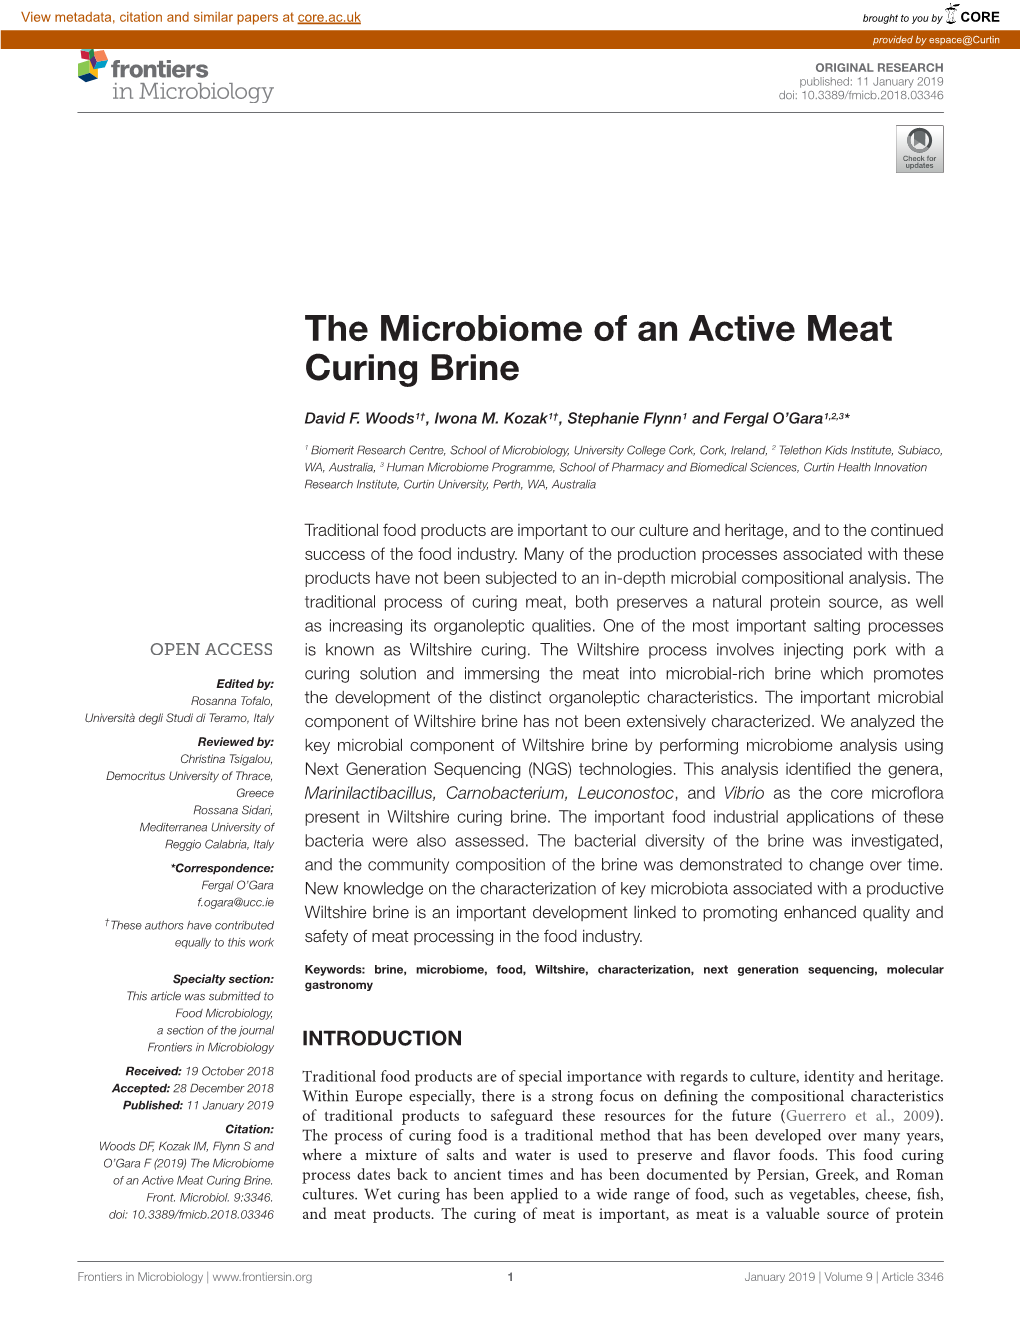 The Microbiome of an Active Meat Curing Brine